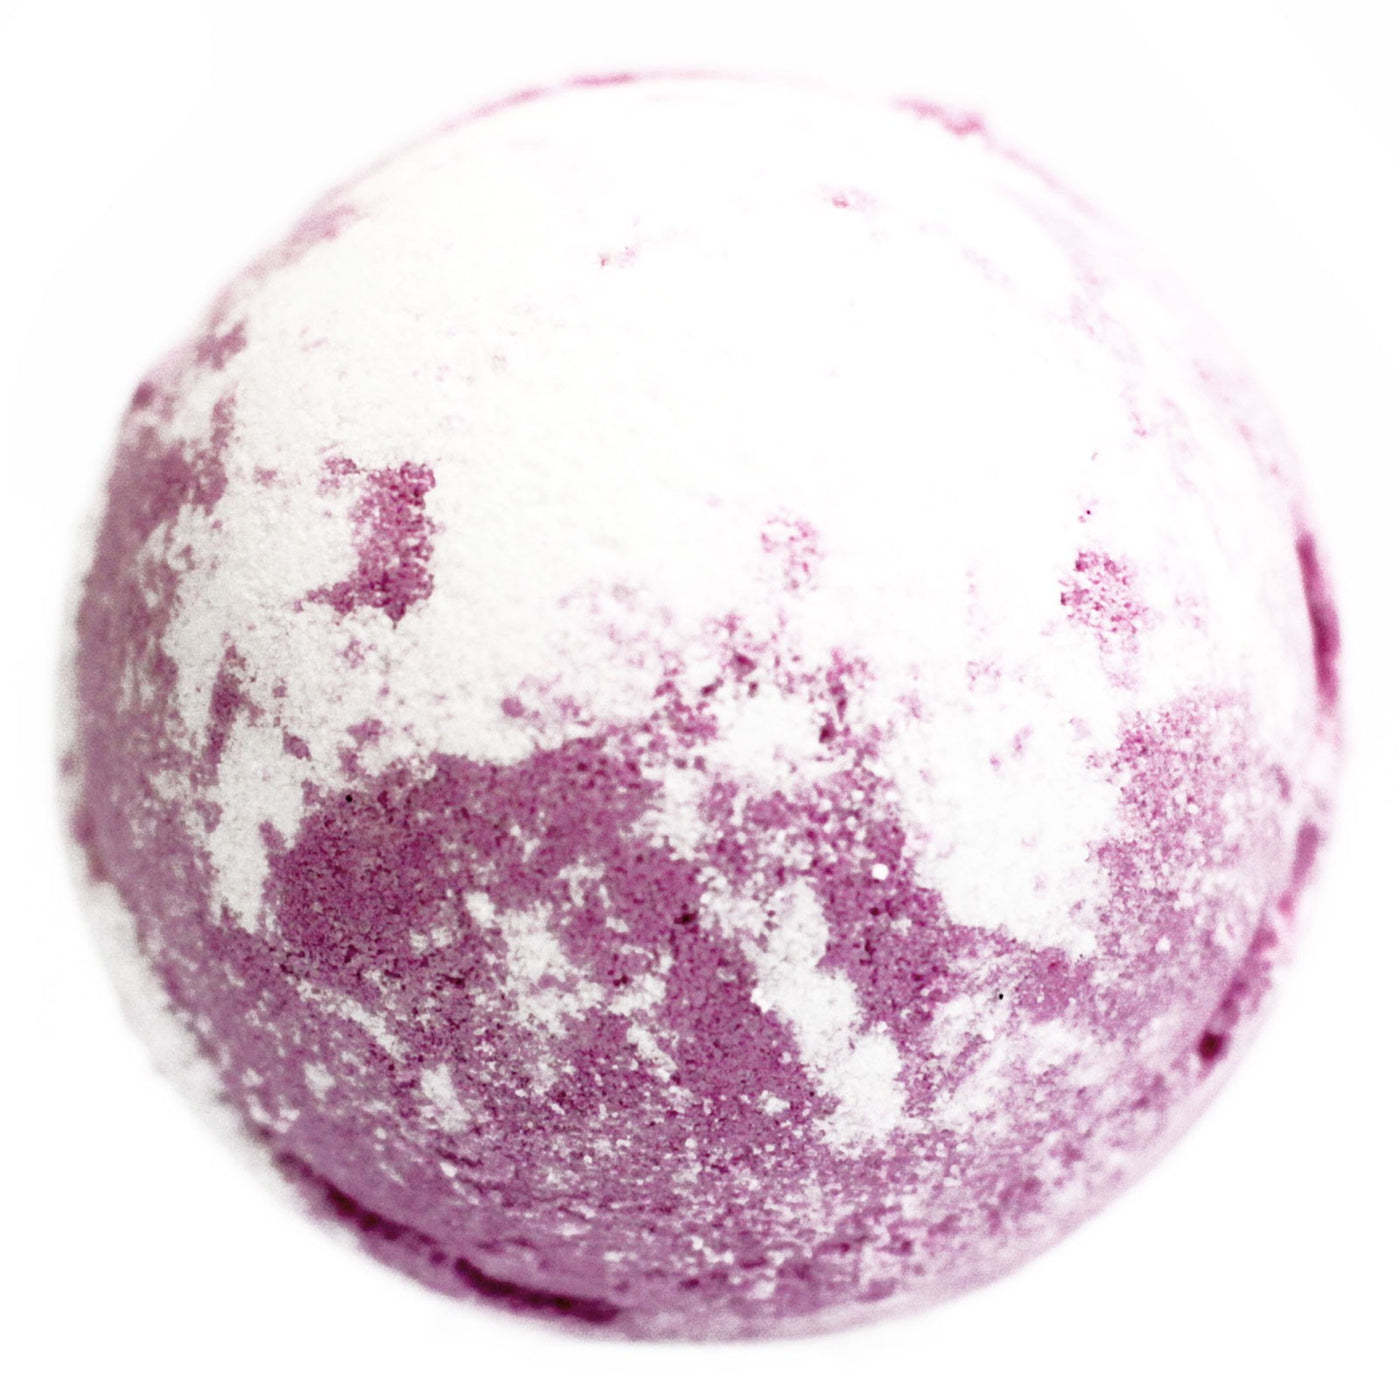 Large Shea Butter Bath Bomb With Raspberry And Black Pepper.